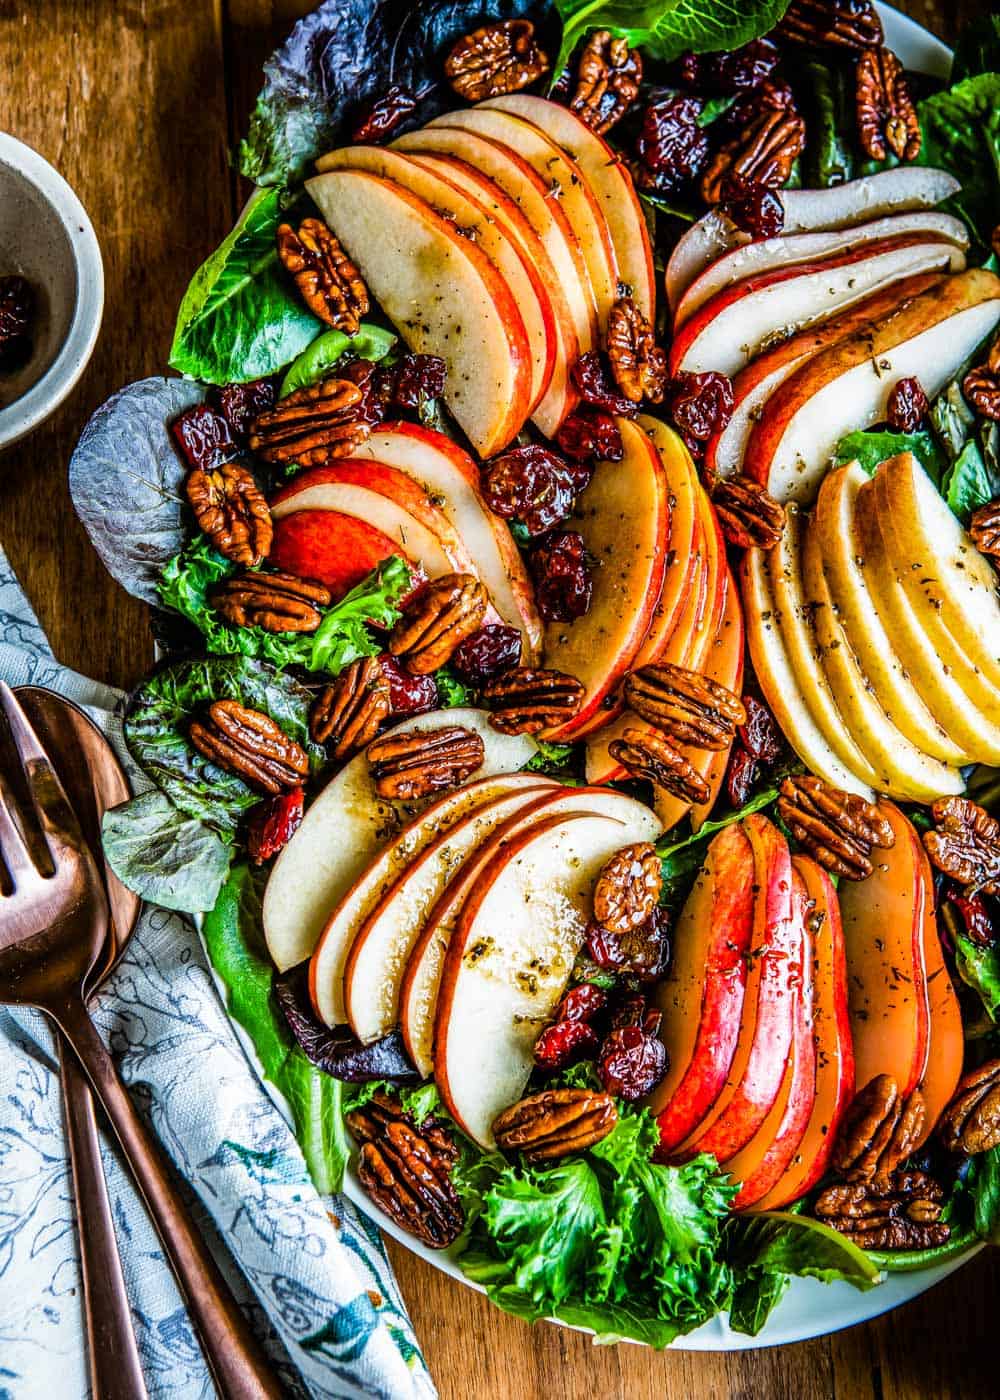 Fall Salad with candied pears for side dish